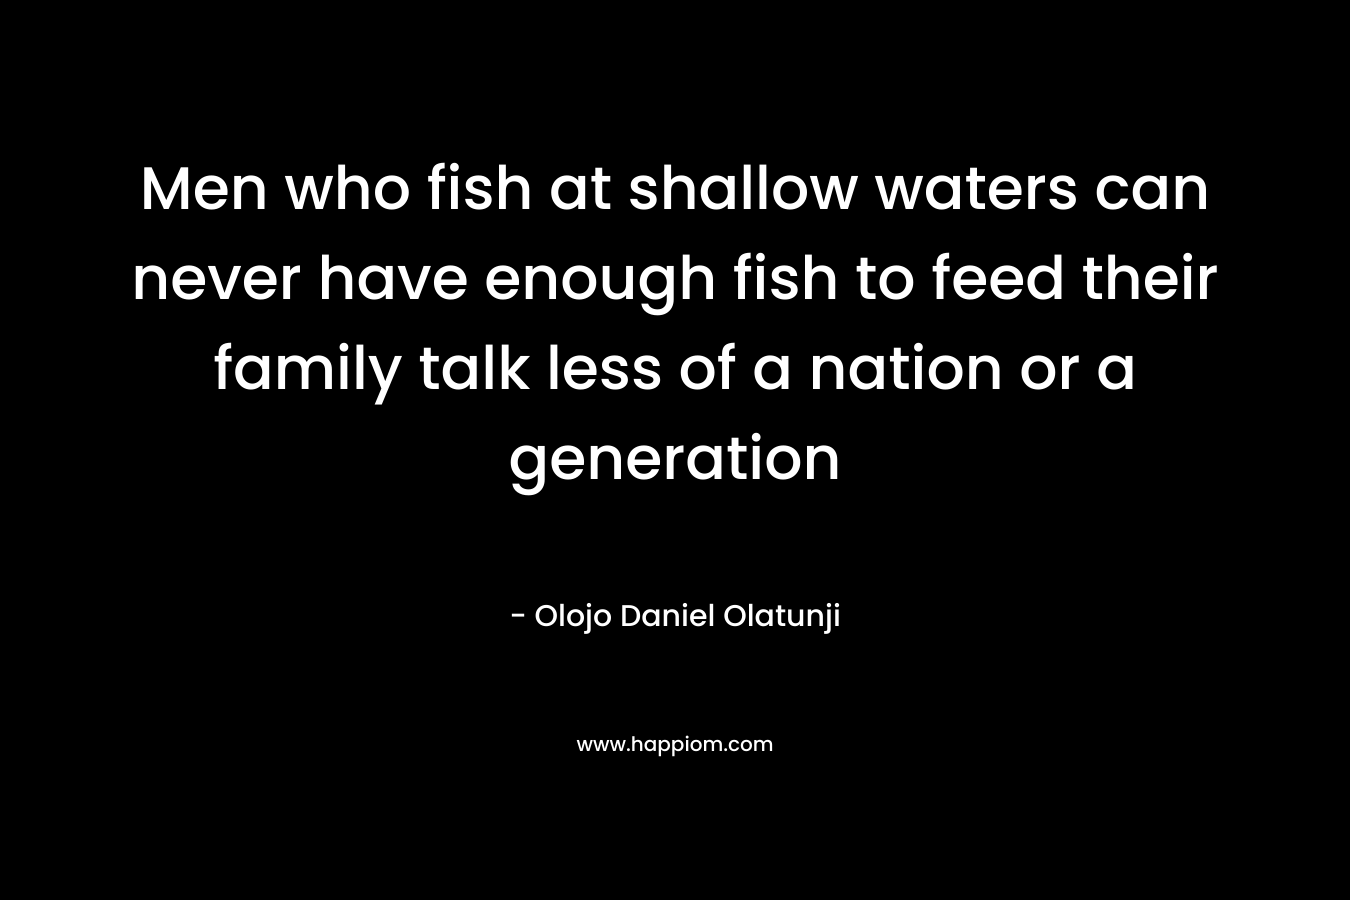 Men who fish at shallow waters can never have enough fish to feed their family talk less of a nation or a generation